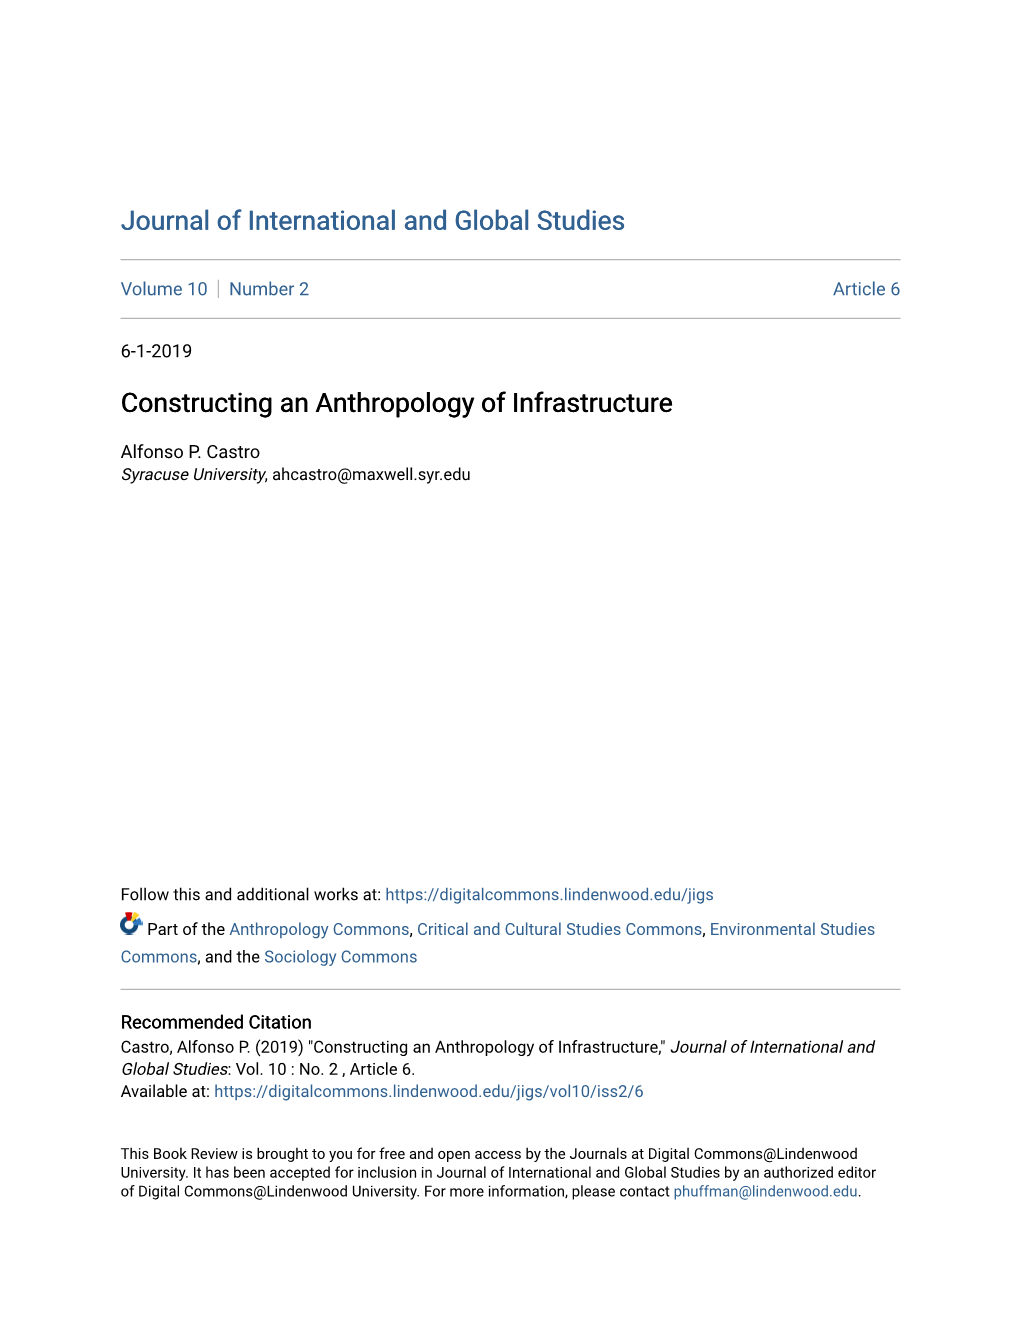 Constructing an Anthropology of Infrastructure